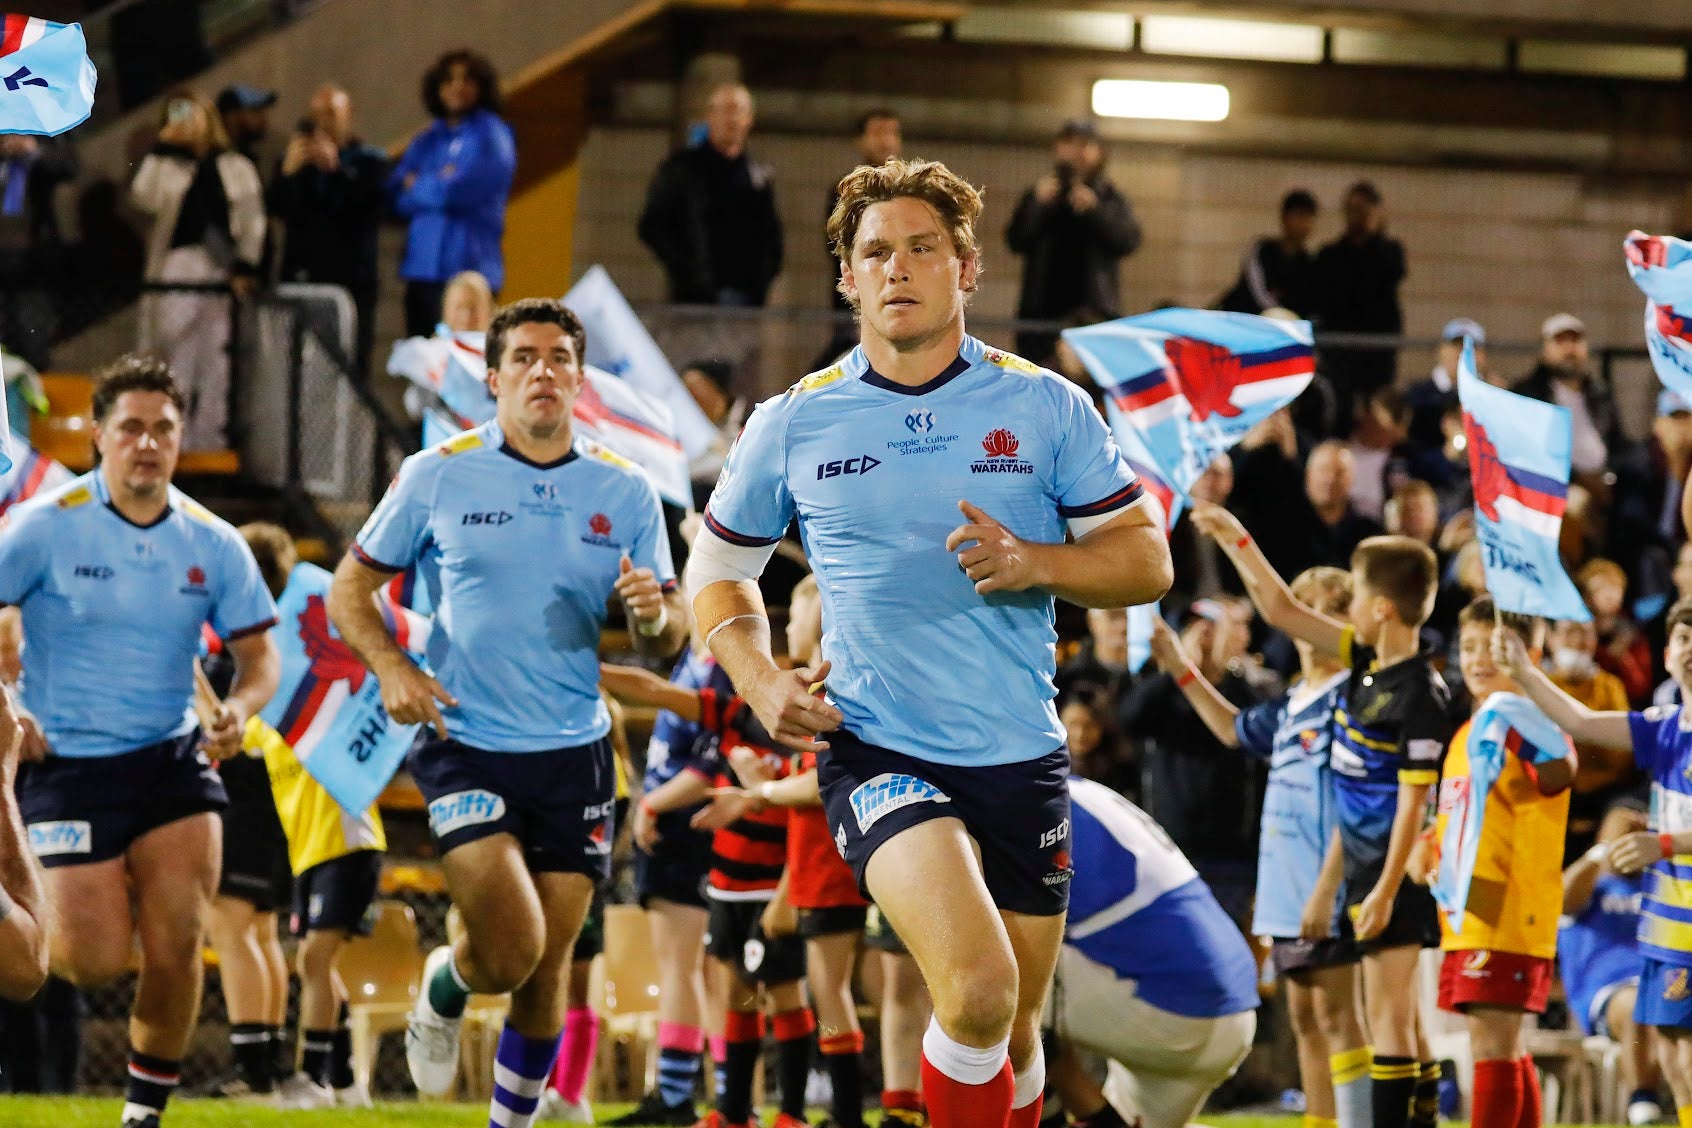 They're coming home! NSW Waratahs Tickets now on sale